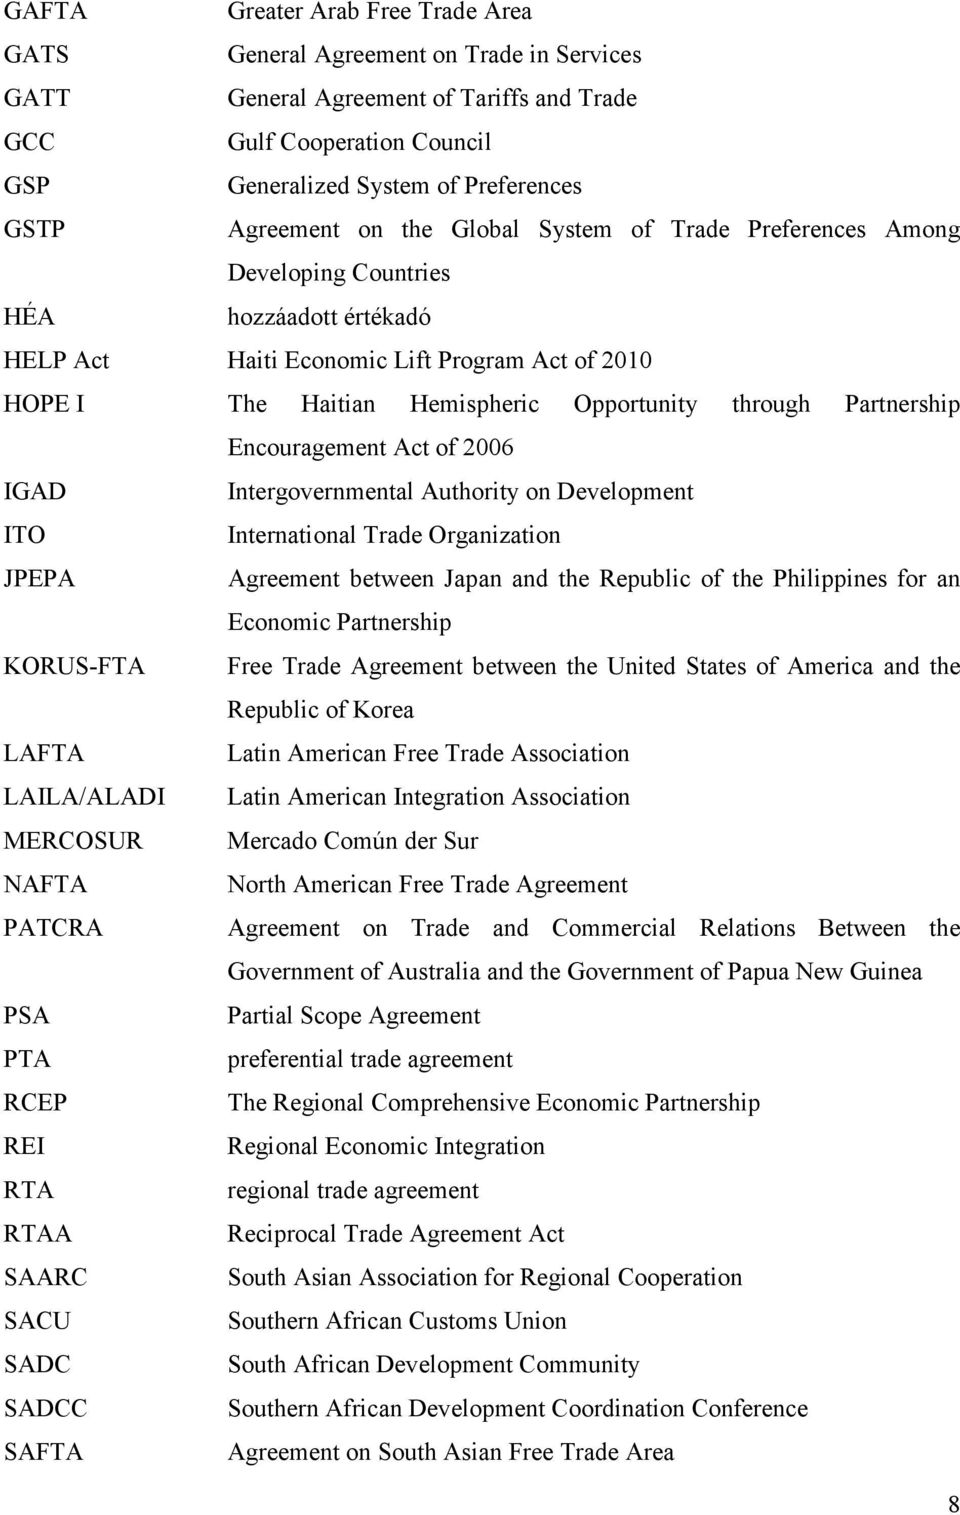 through Partnership Encouragement Act of 2006 IGAD Intergovernmental Authority on Development ITO International Trade Organization JPEPA Agreement between Japan and the Republic of the Philippines